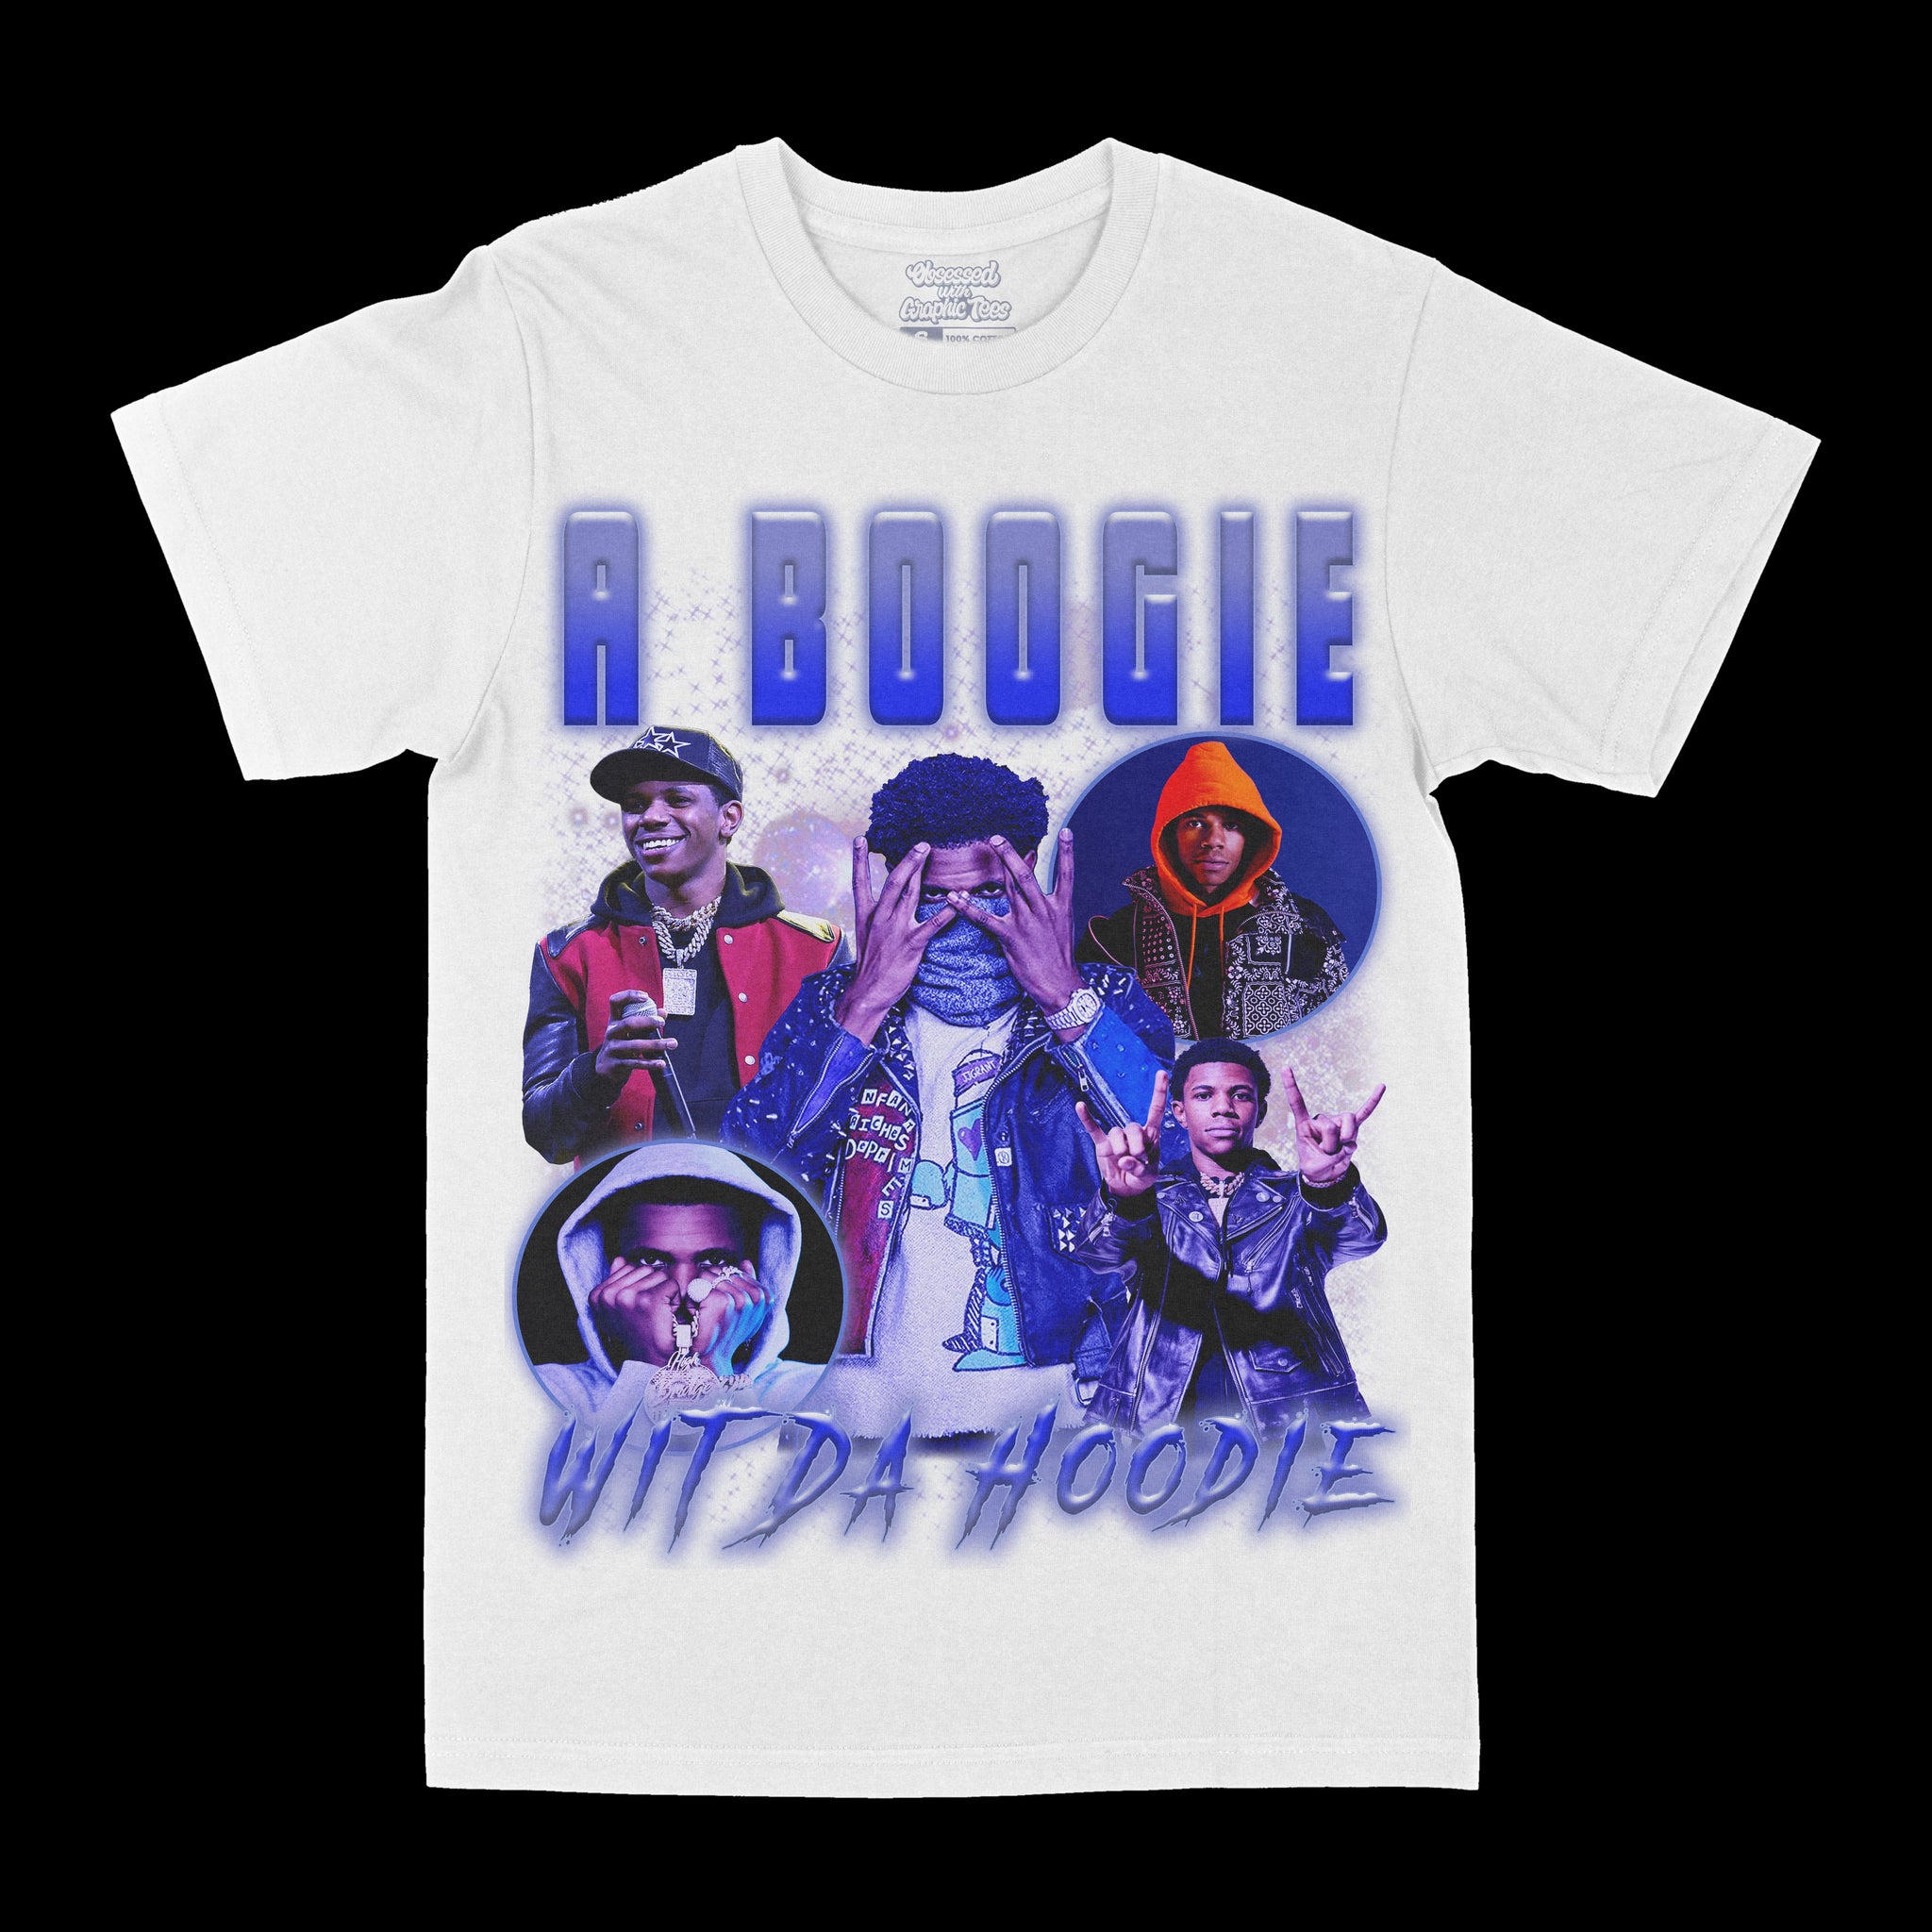 A Boogie Graphic Tee